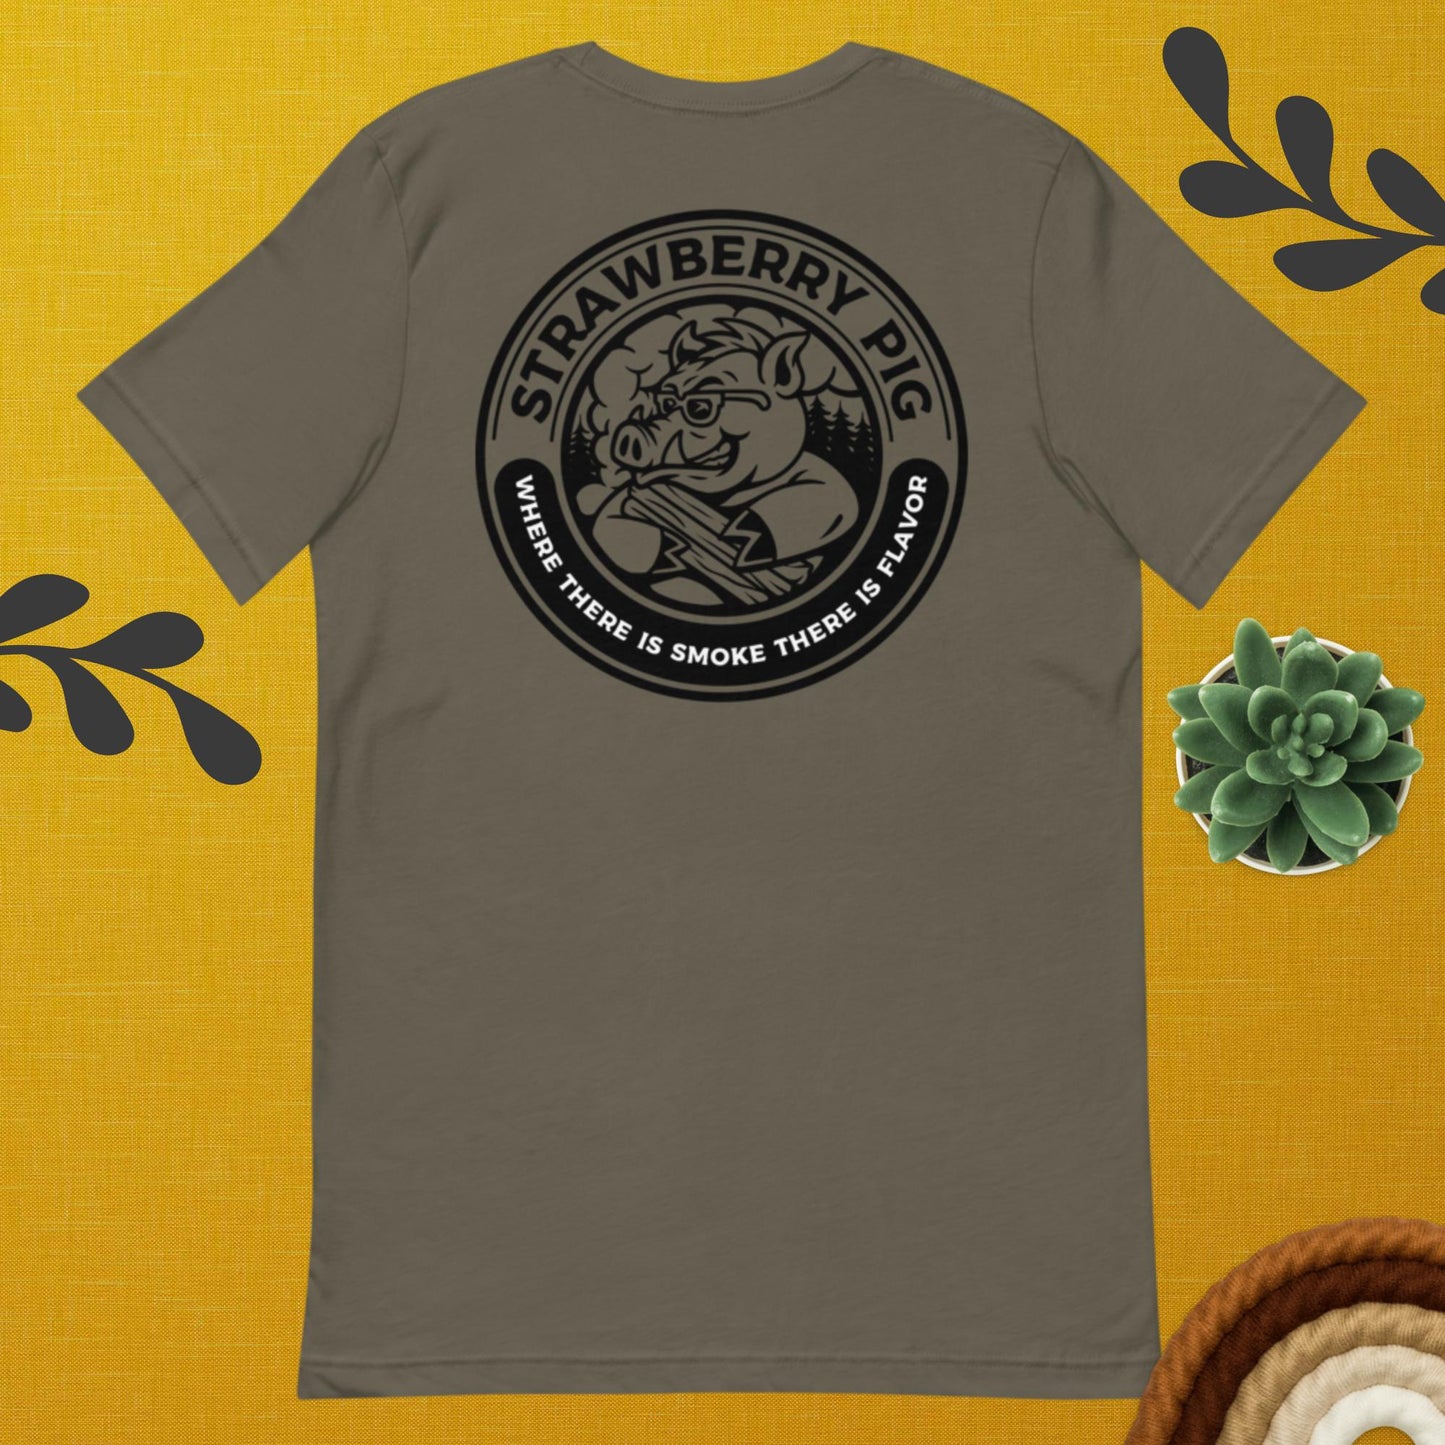 Get your Strawberry Pig wood chip label T-shirt from Island Flavor Co.